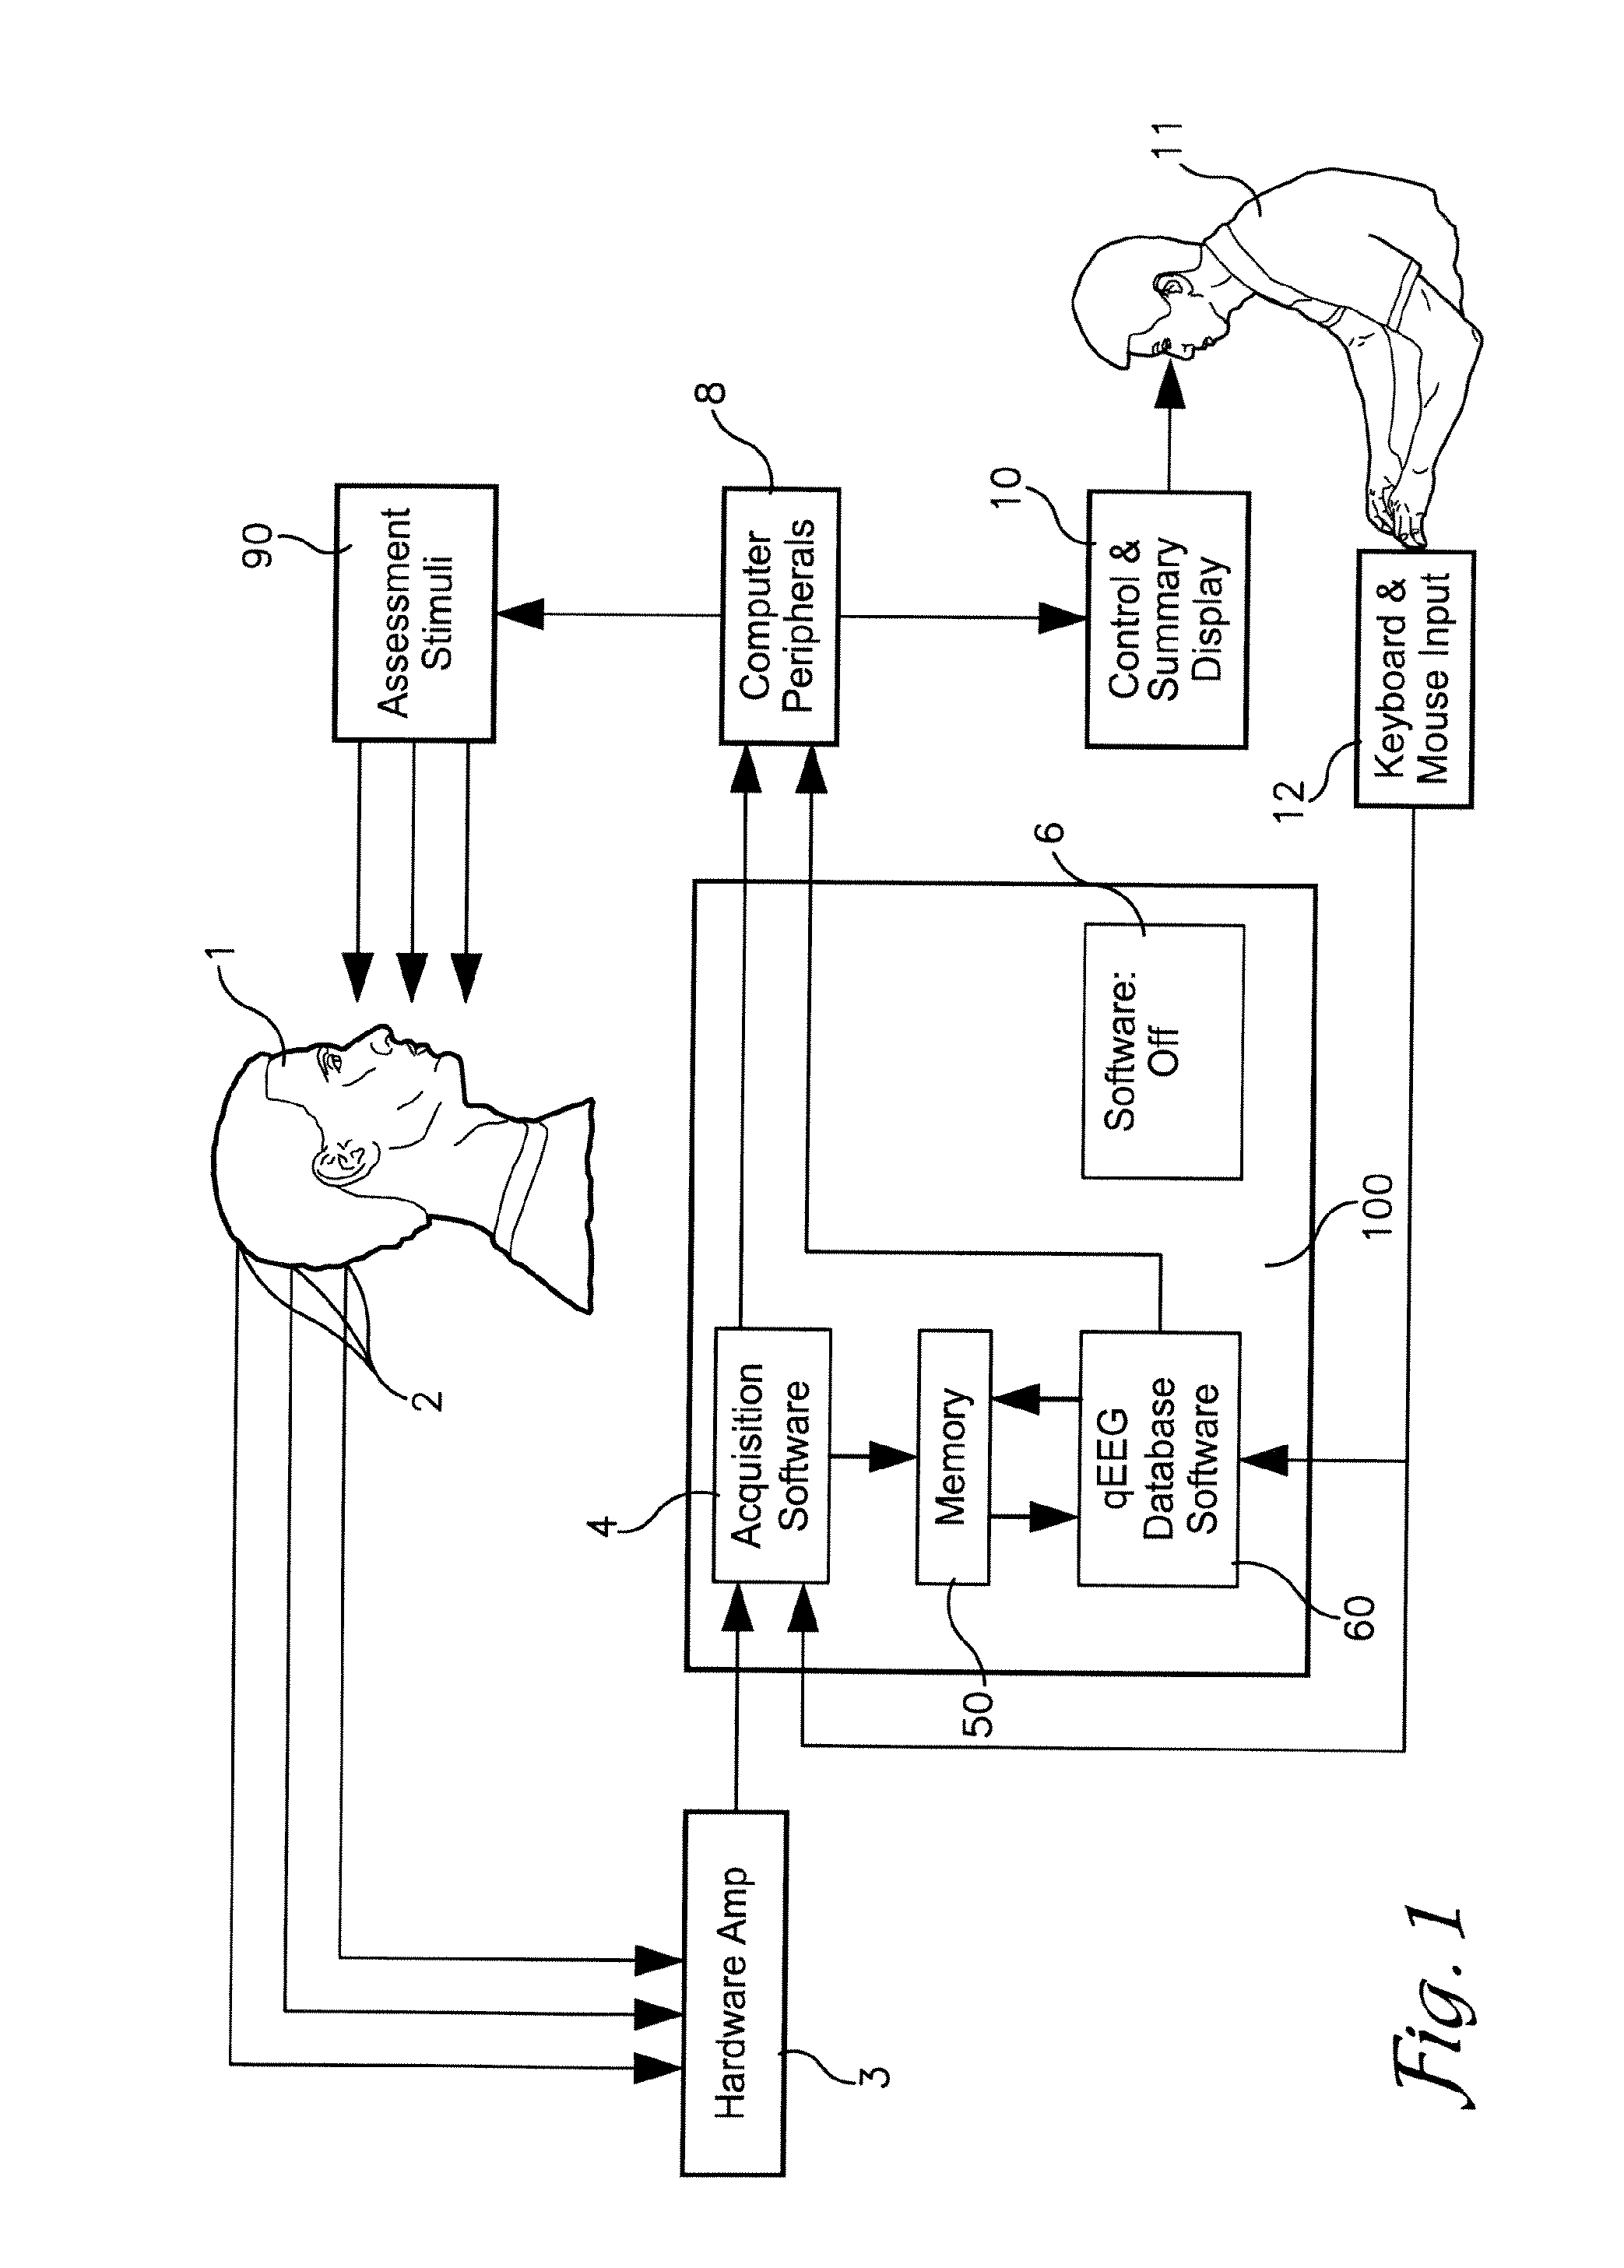 System and method for analyzing electroencephalography data